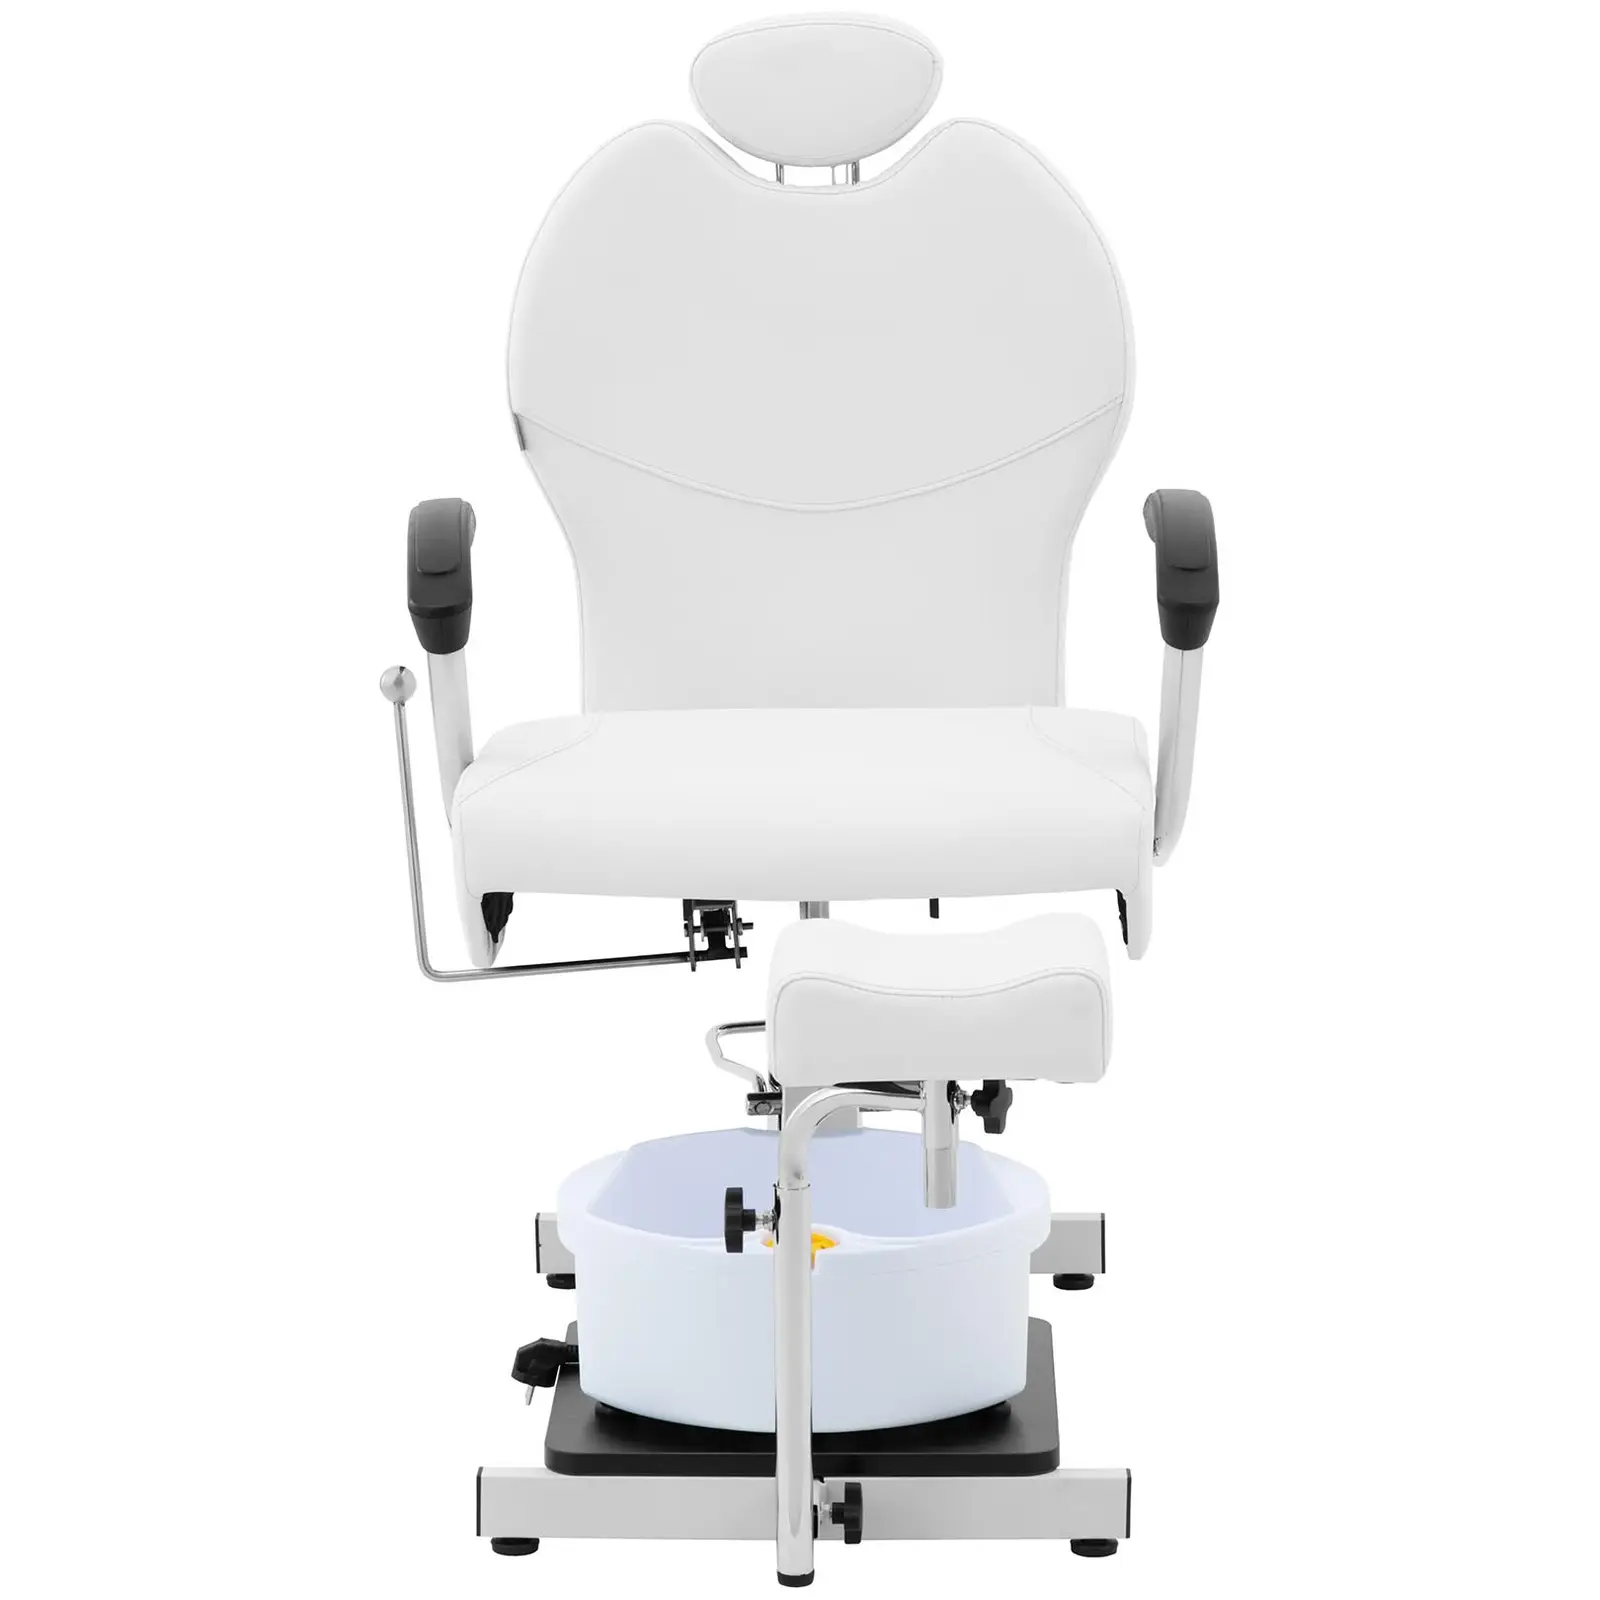 Pedicure Chair - with a leg rest and foot bath